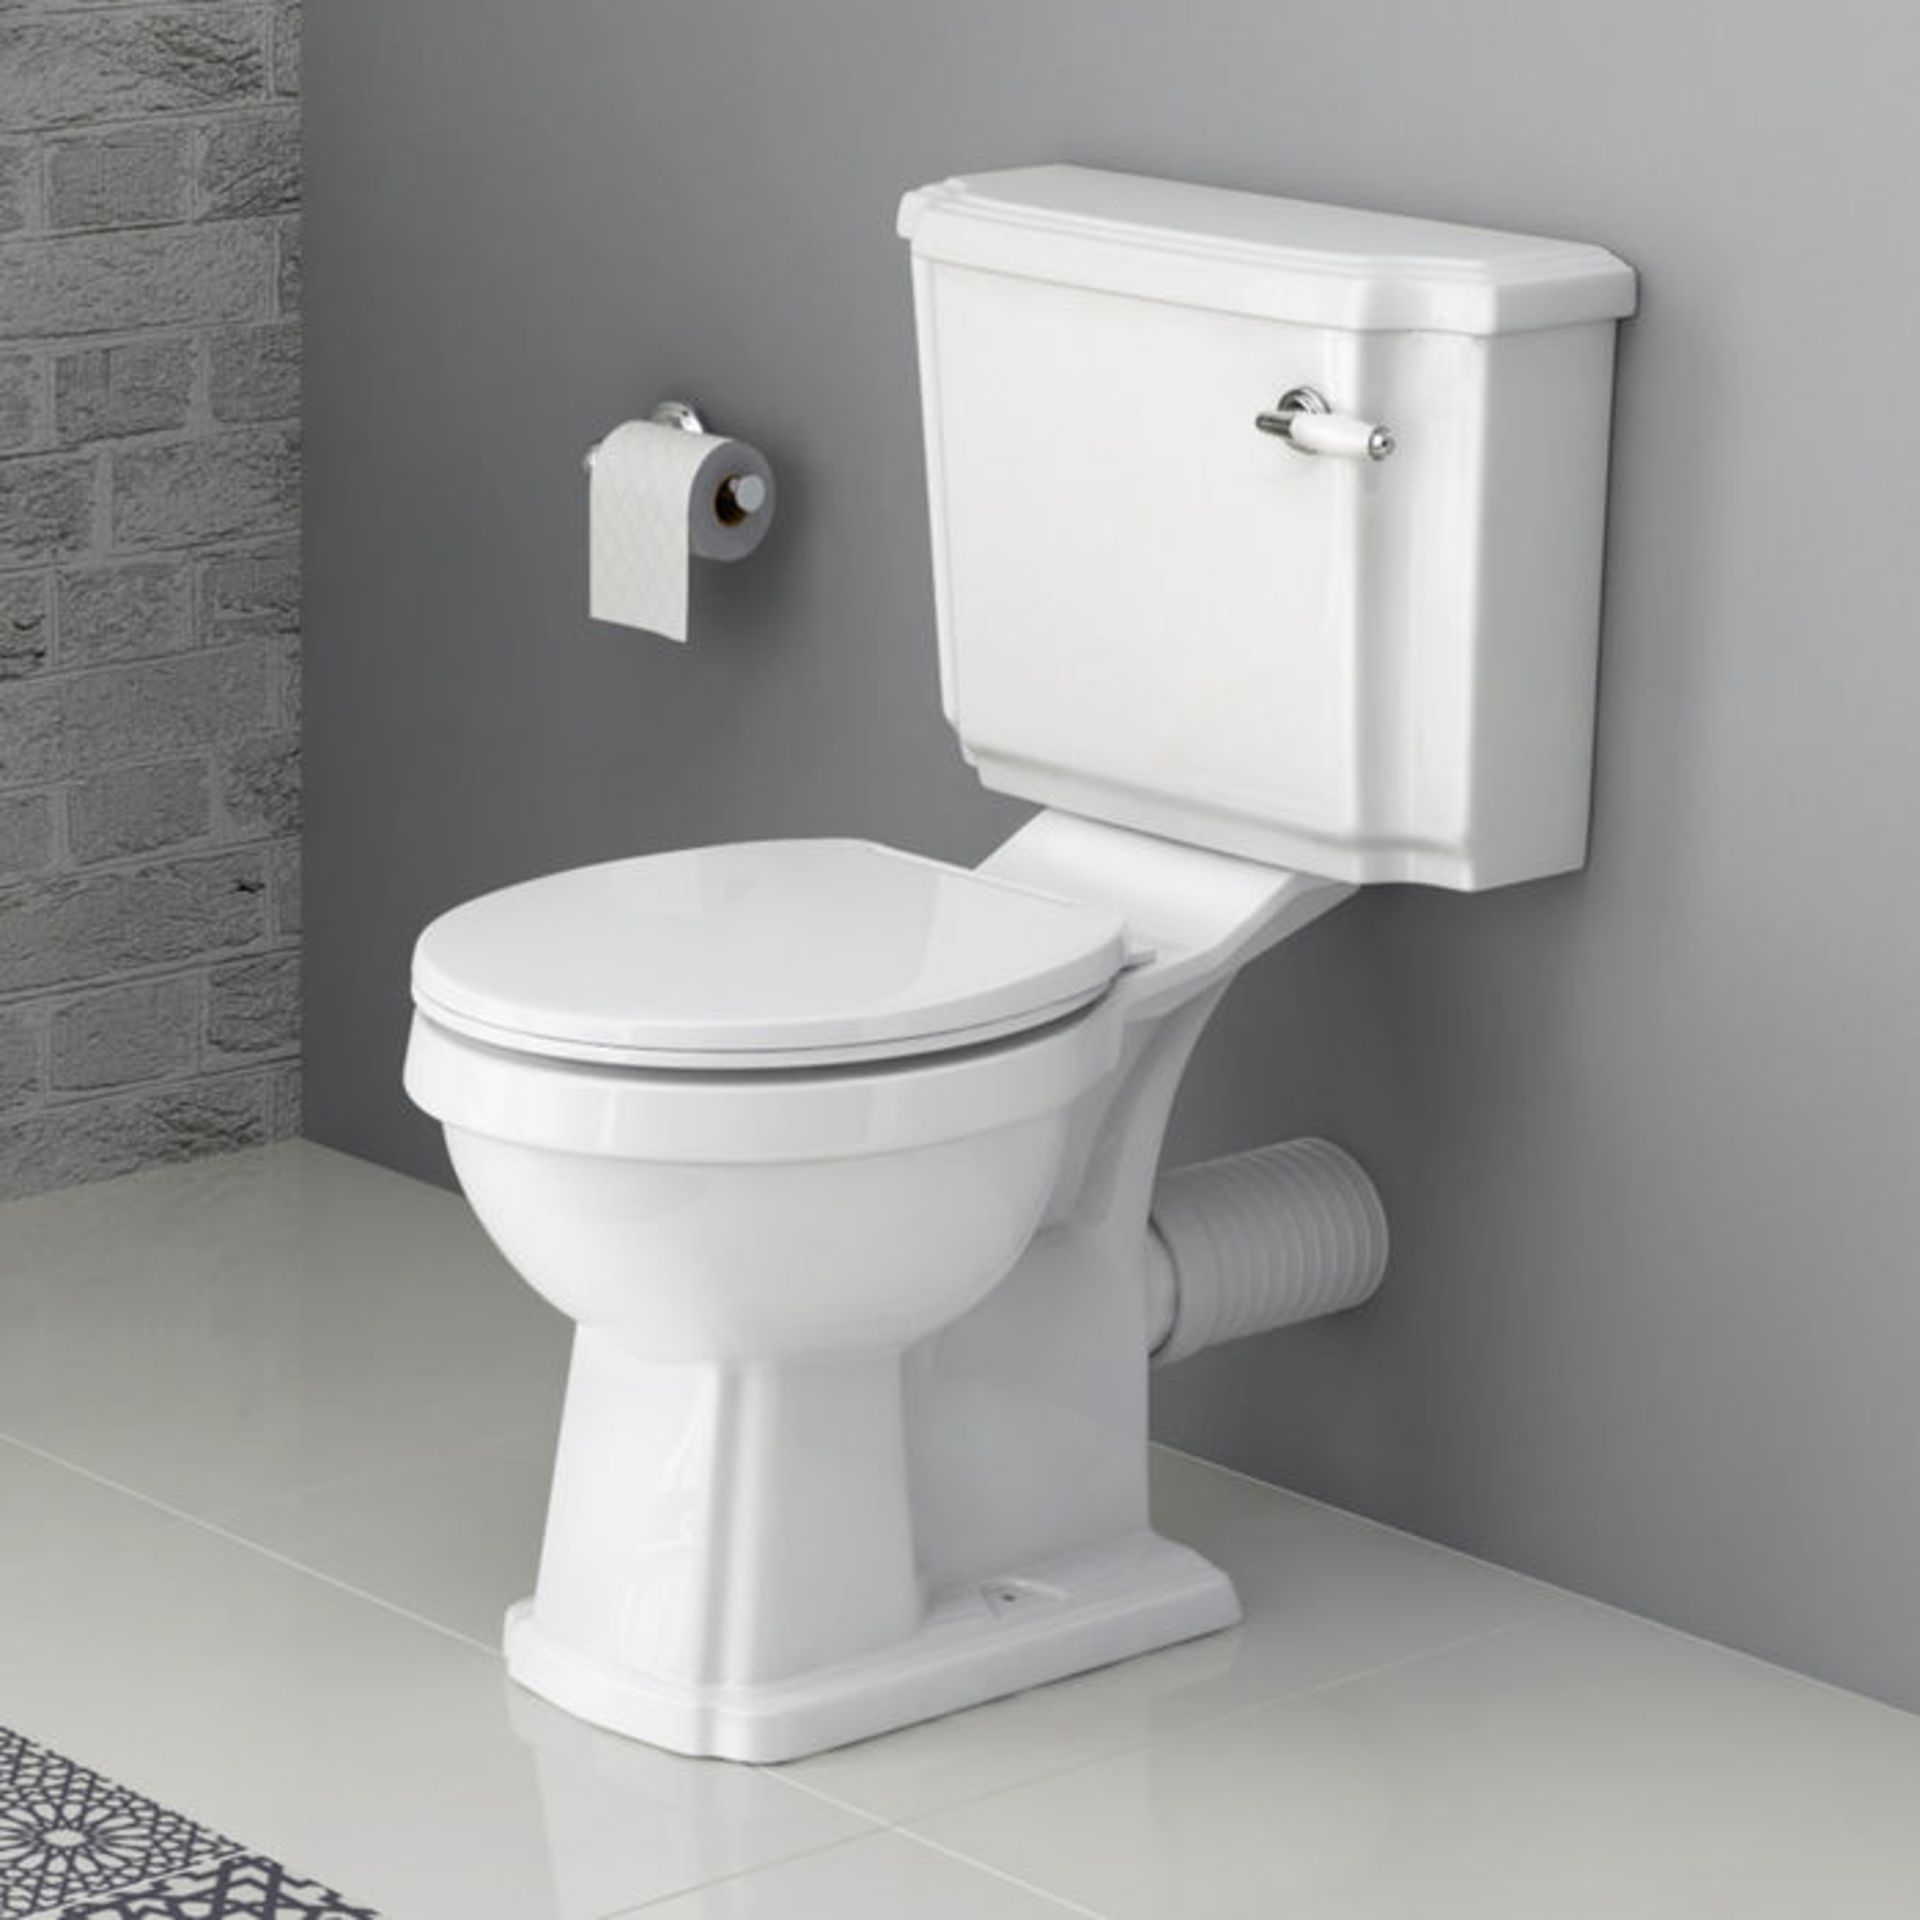 New & Boxed Cambridge Traditional Close Coupled Toilet & Cistern - White Seat. Ccg62...